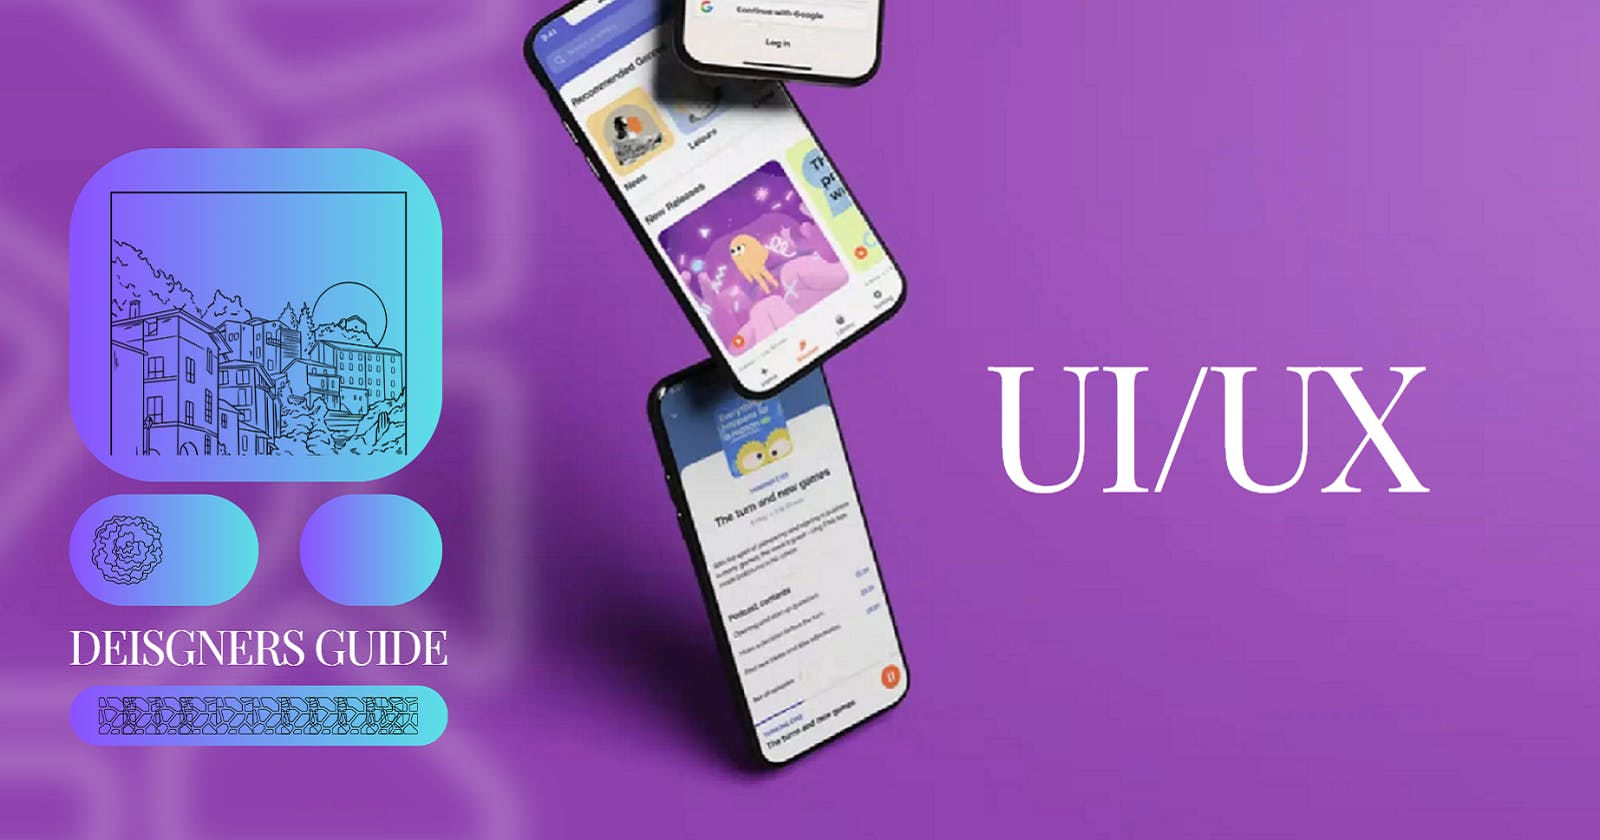 UI/UX Design Guide: What's the difference and how to become one?